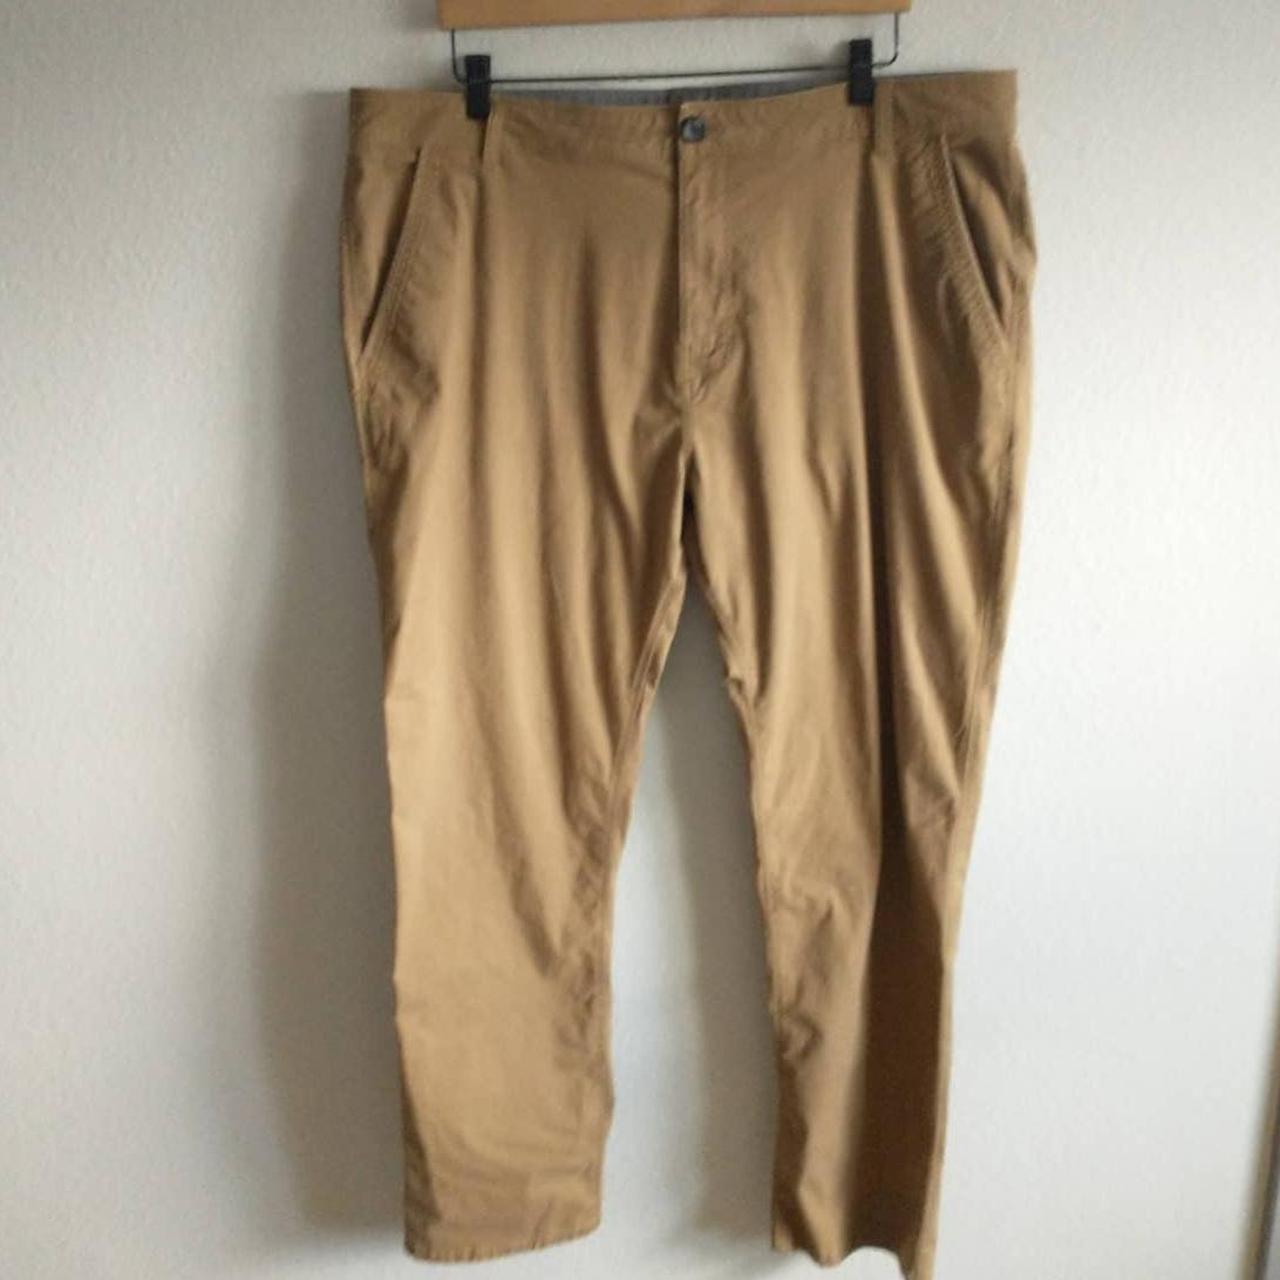 Prana Men's McClee Straight Fit Chino Pant in Bed... - Depop